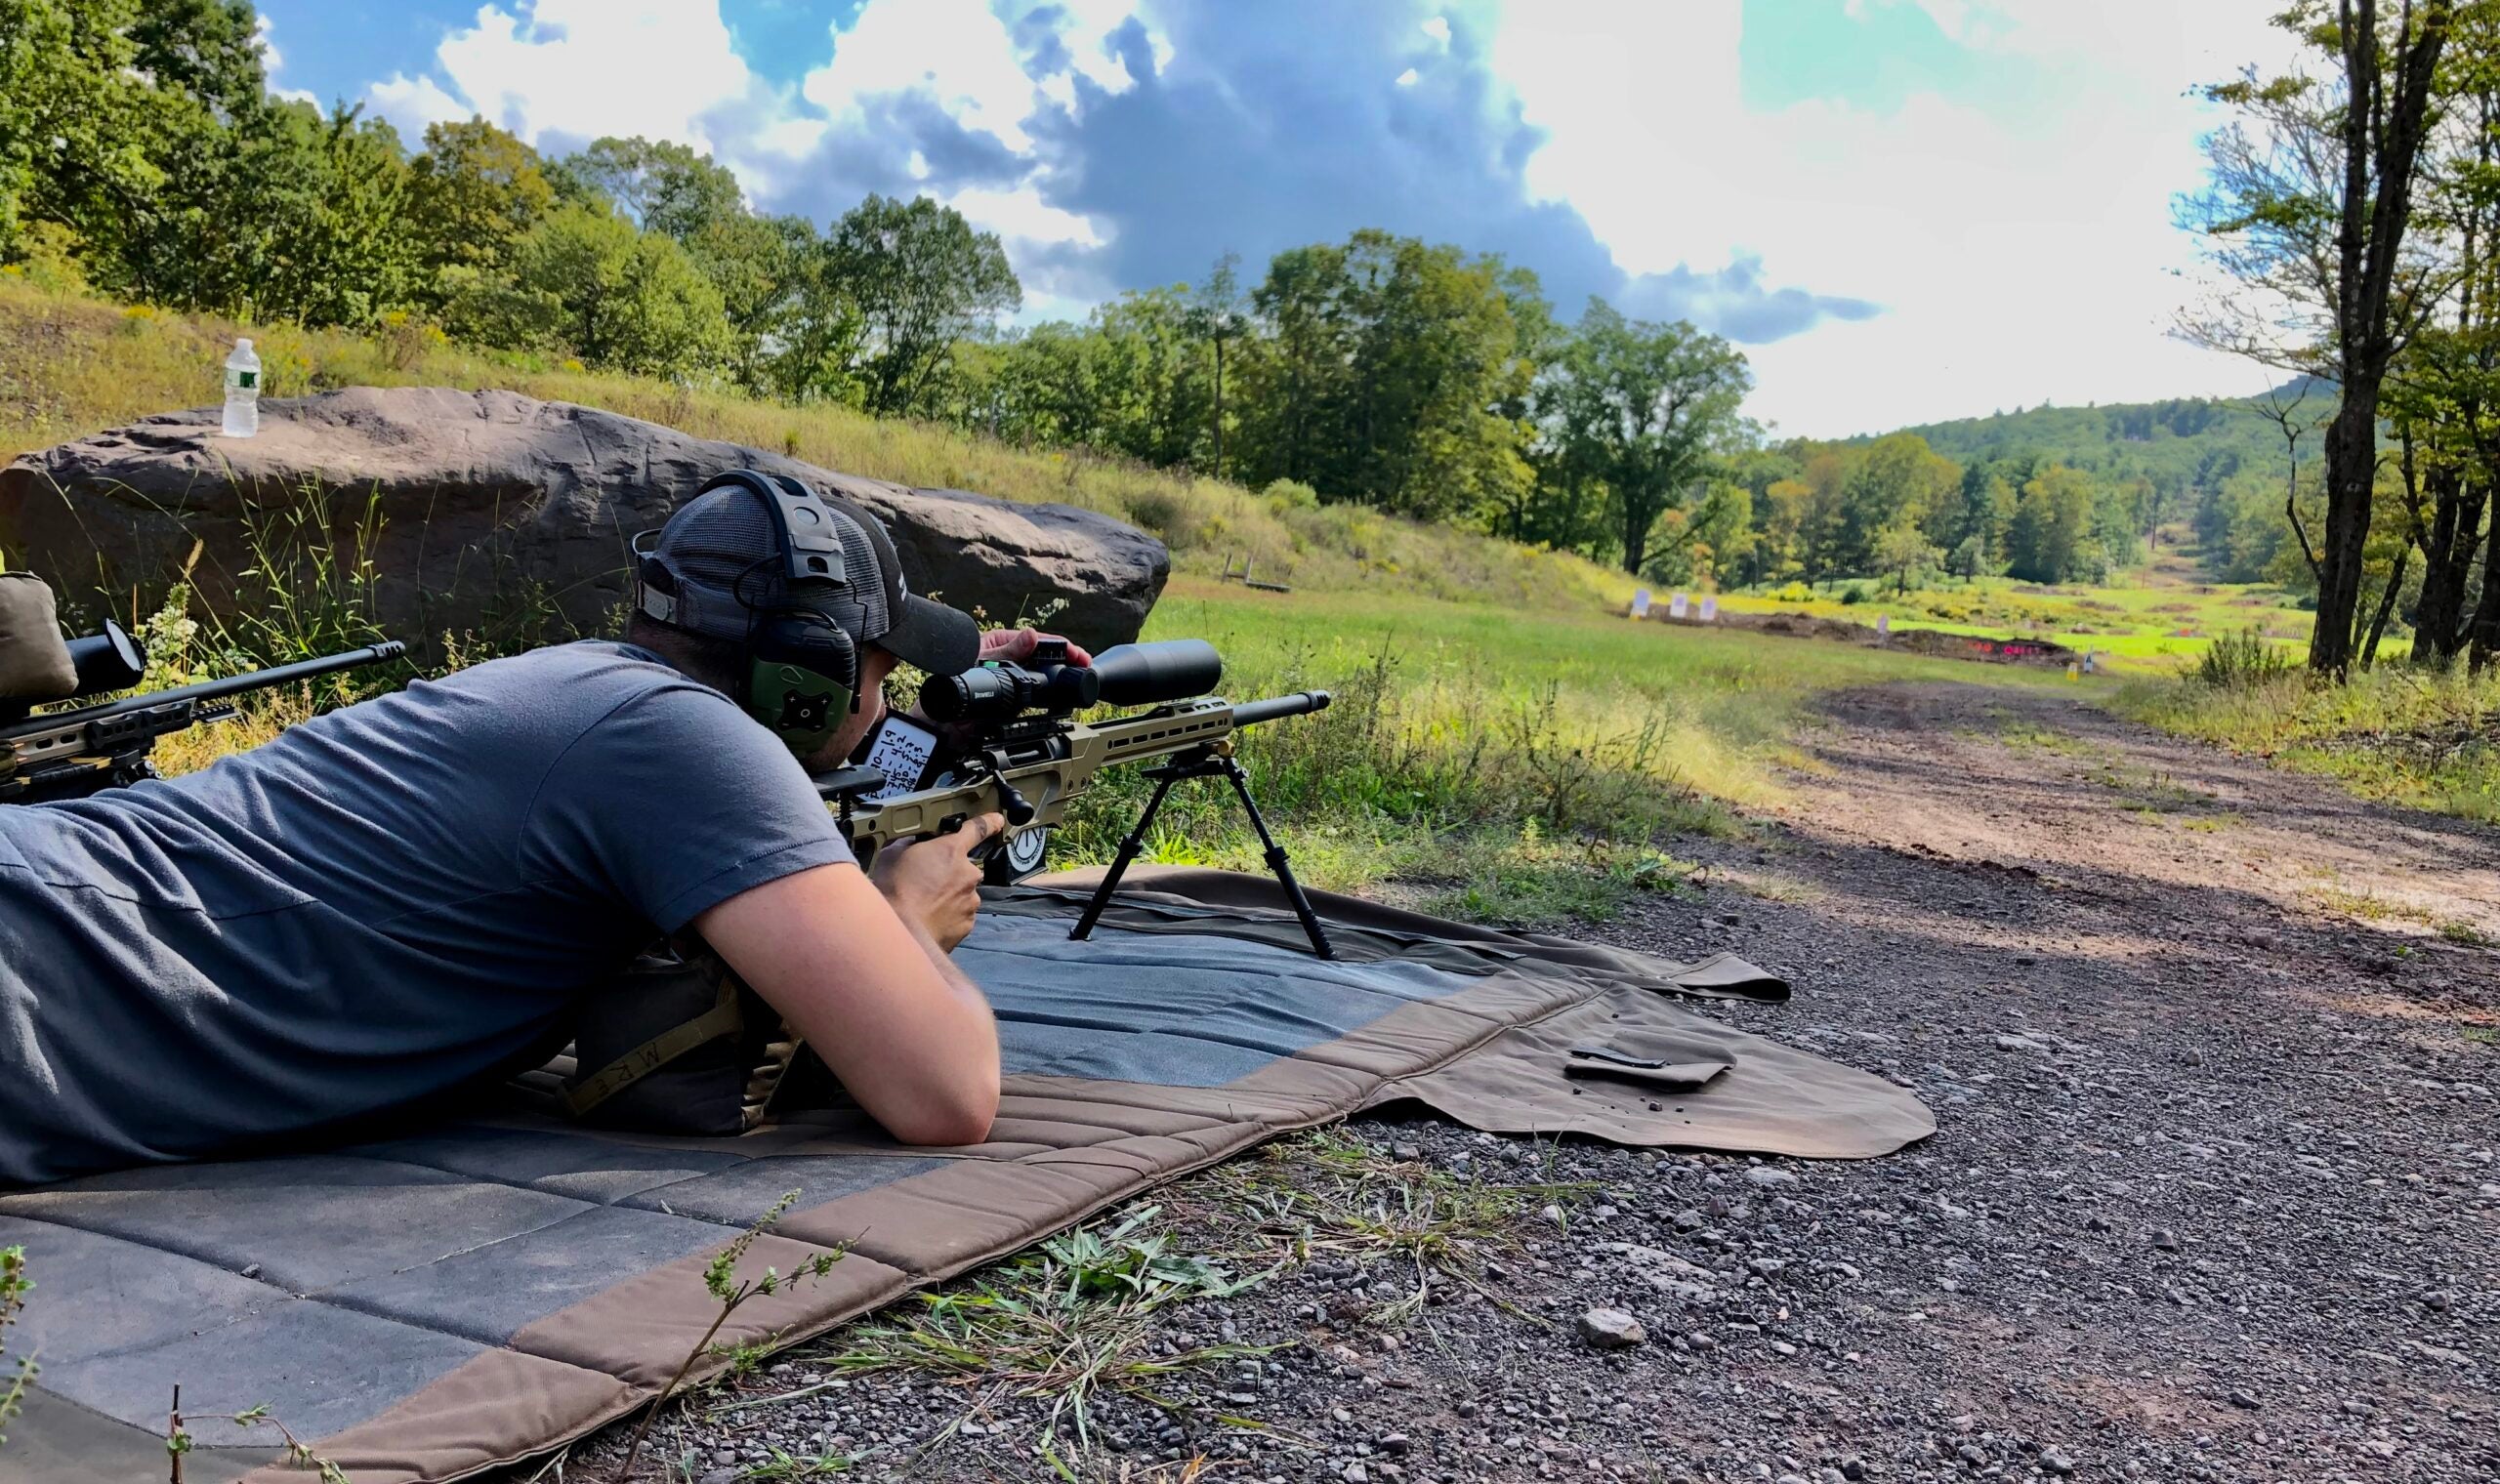 A shooter laying down on a pad behind a rifle adjusts his MRAD scope at a long-range shooting match